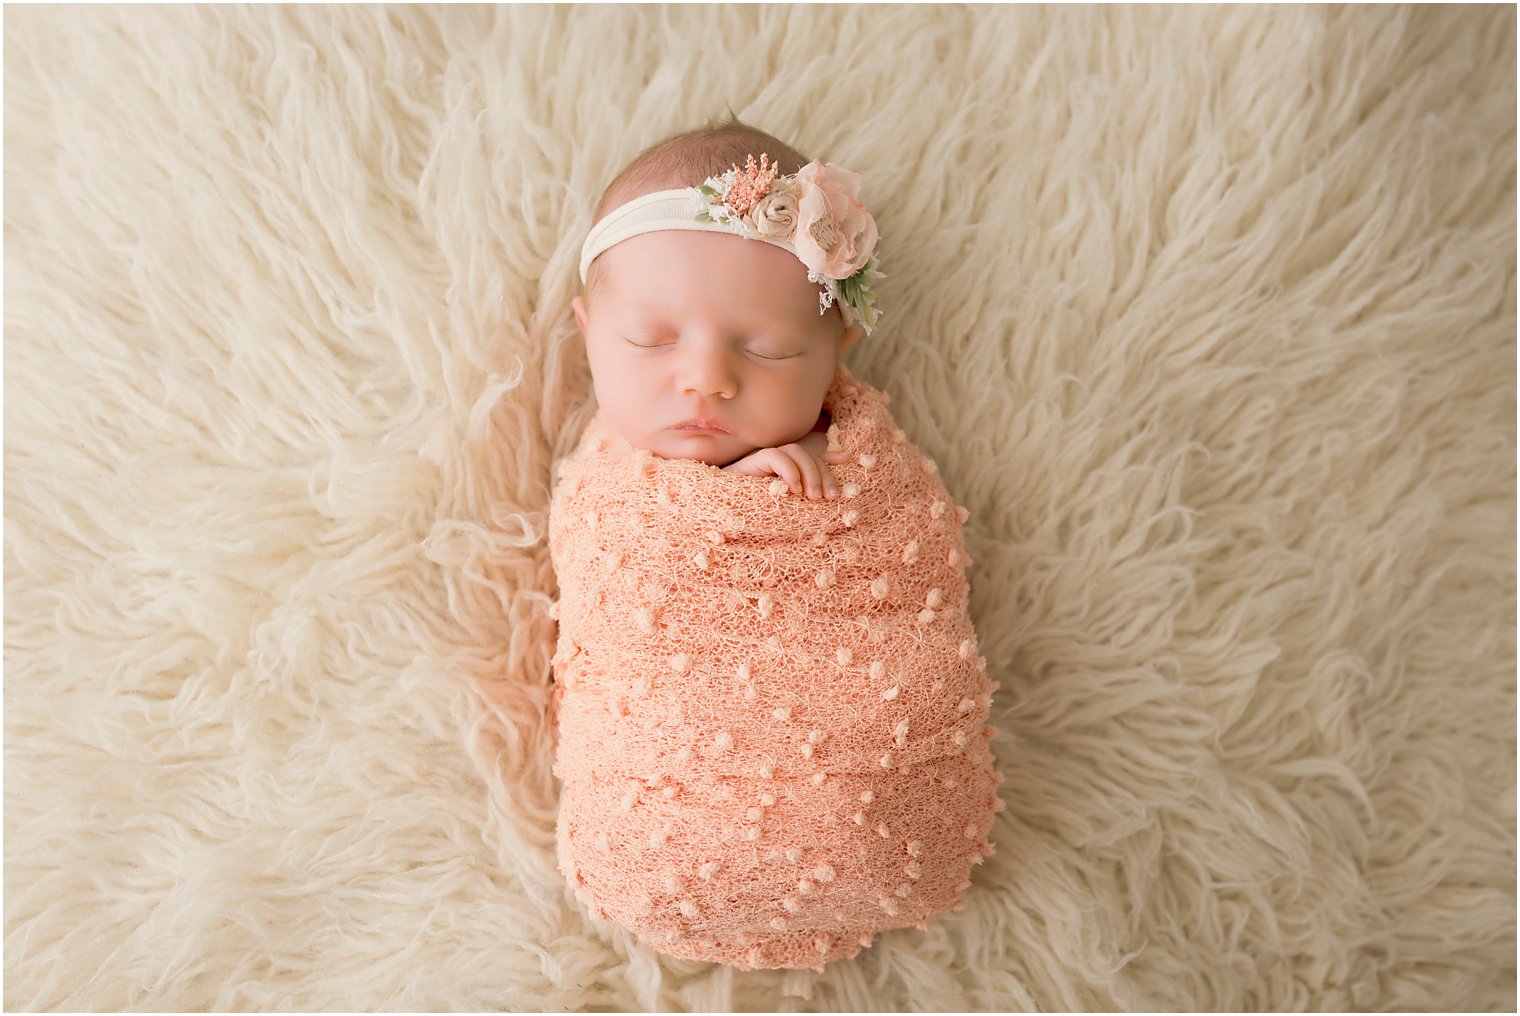 Baby girl with peach styling